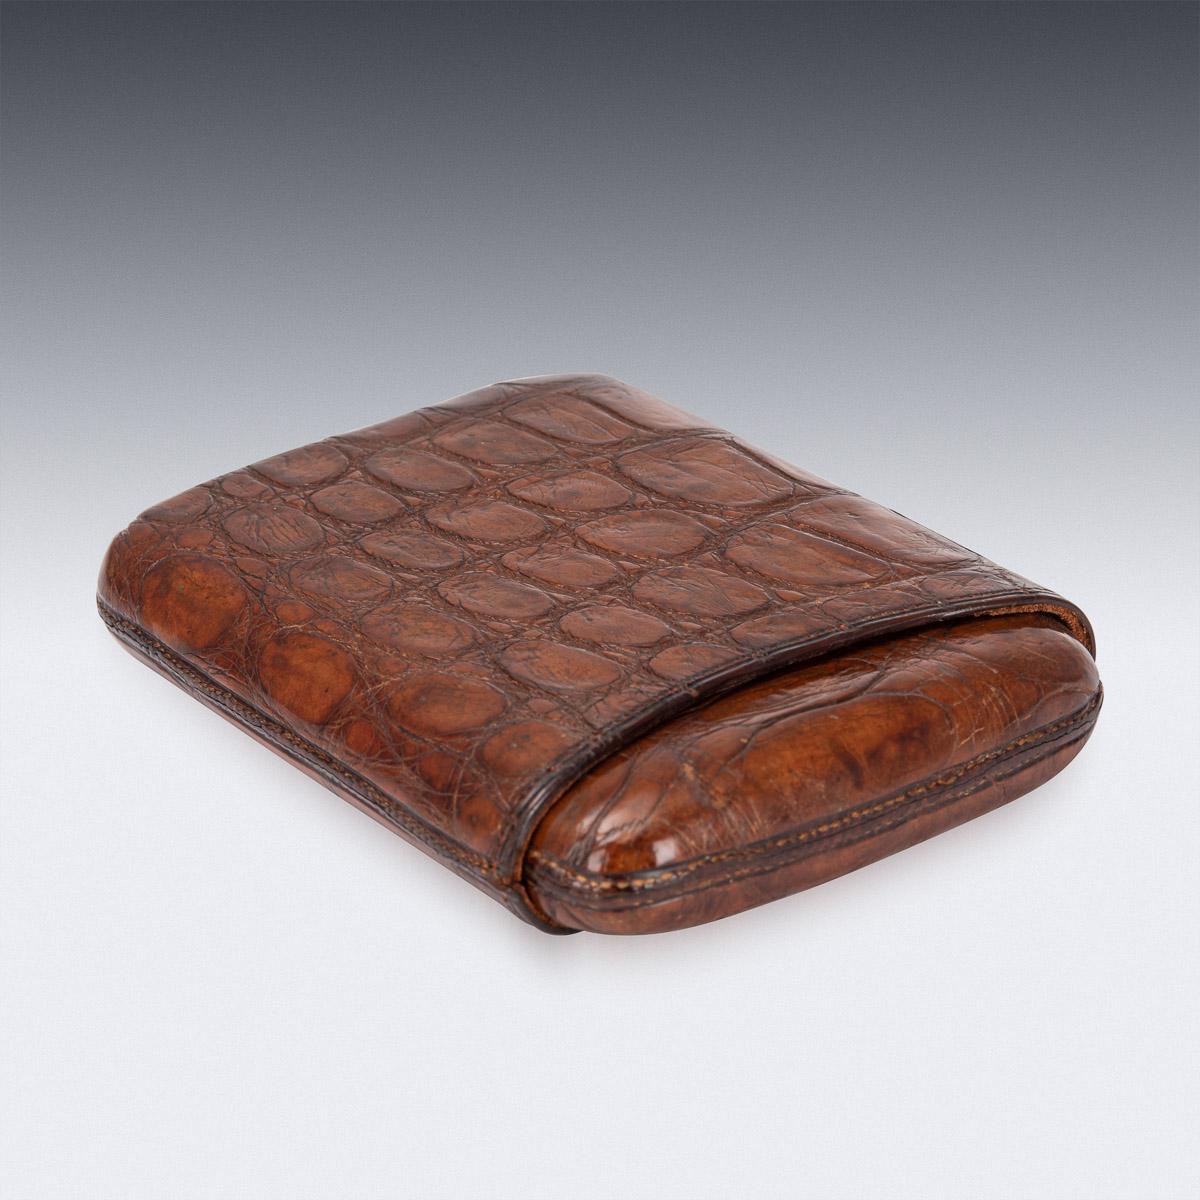 Stylish early 20th century British made sumptuous crocodile leather cigar case, of rounded rectangular form, with a pull off lid and interior that is sufficient for five mid-size cigars. A real conversation piece and a superb piece of history